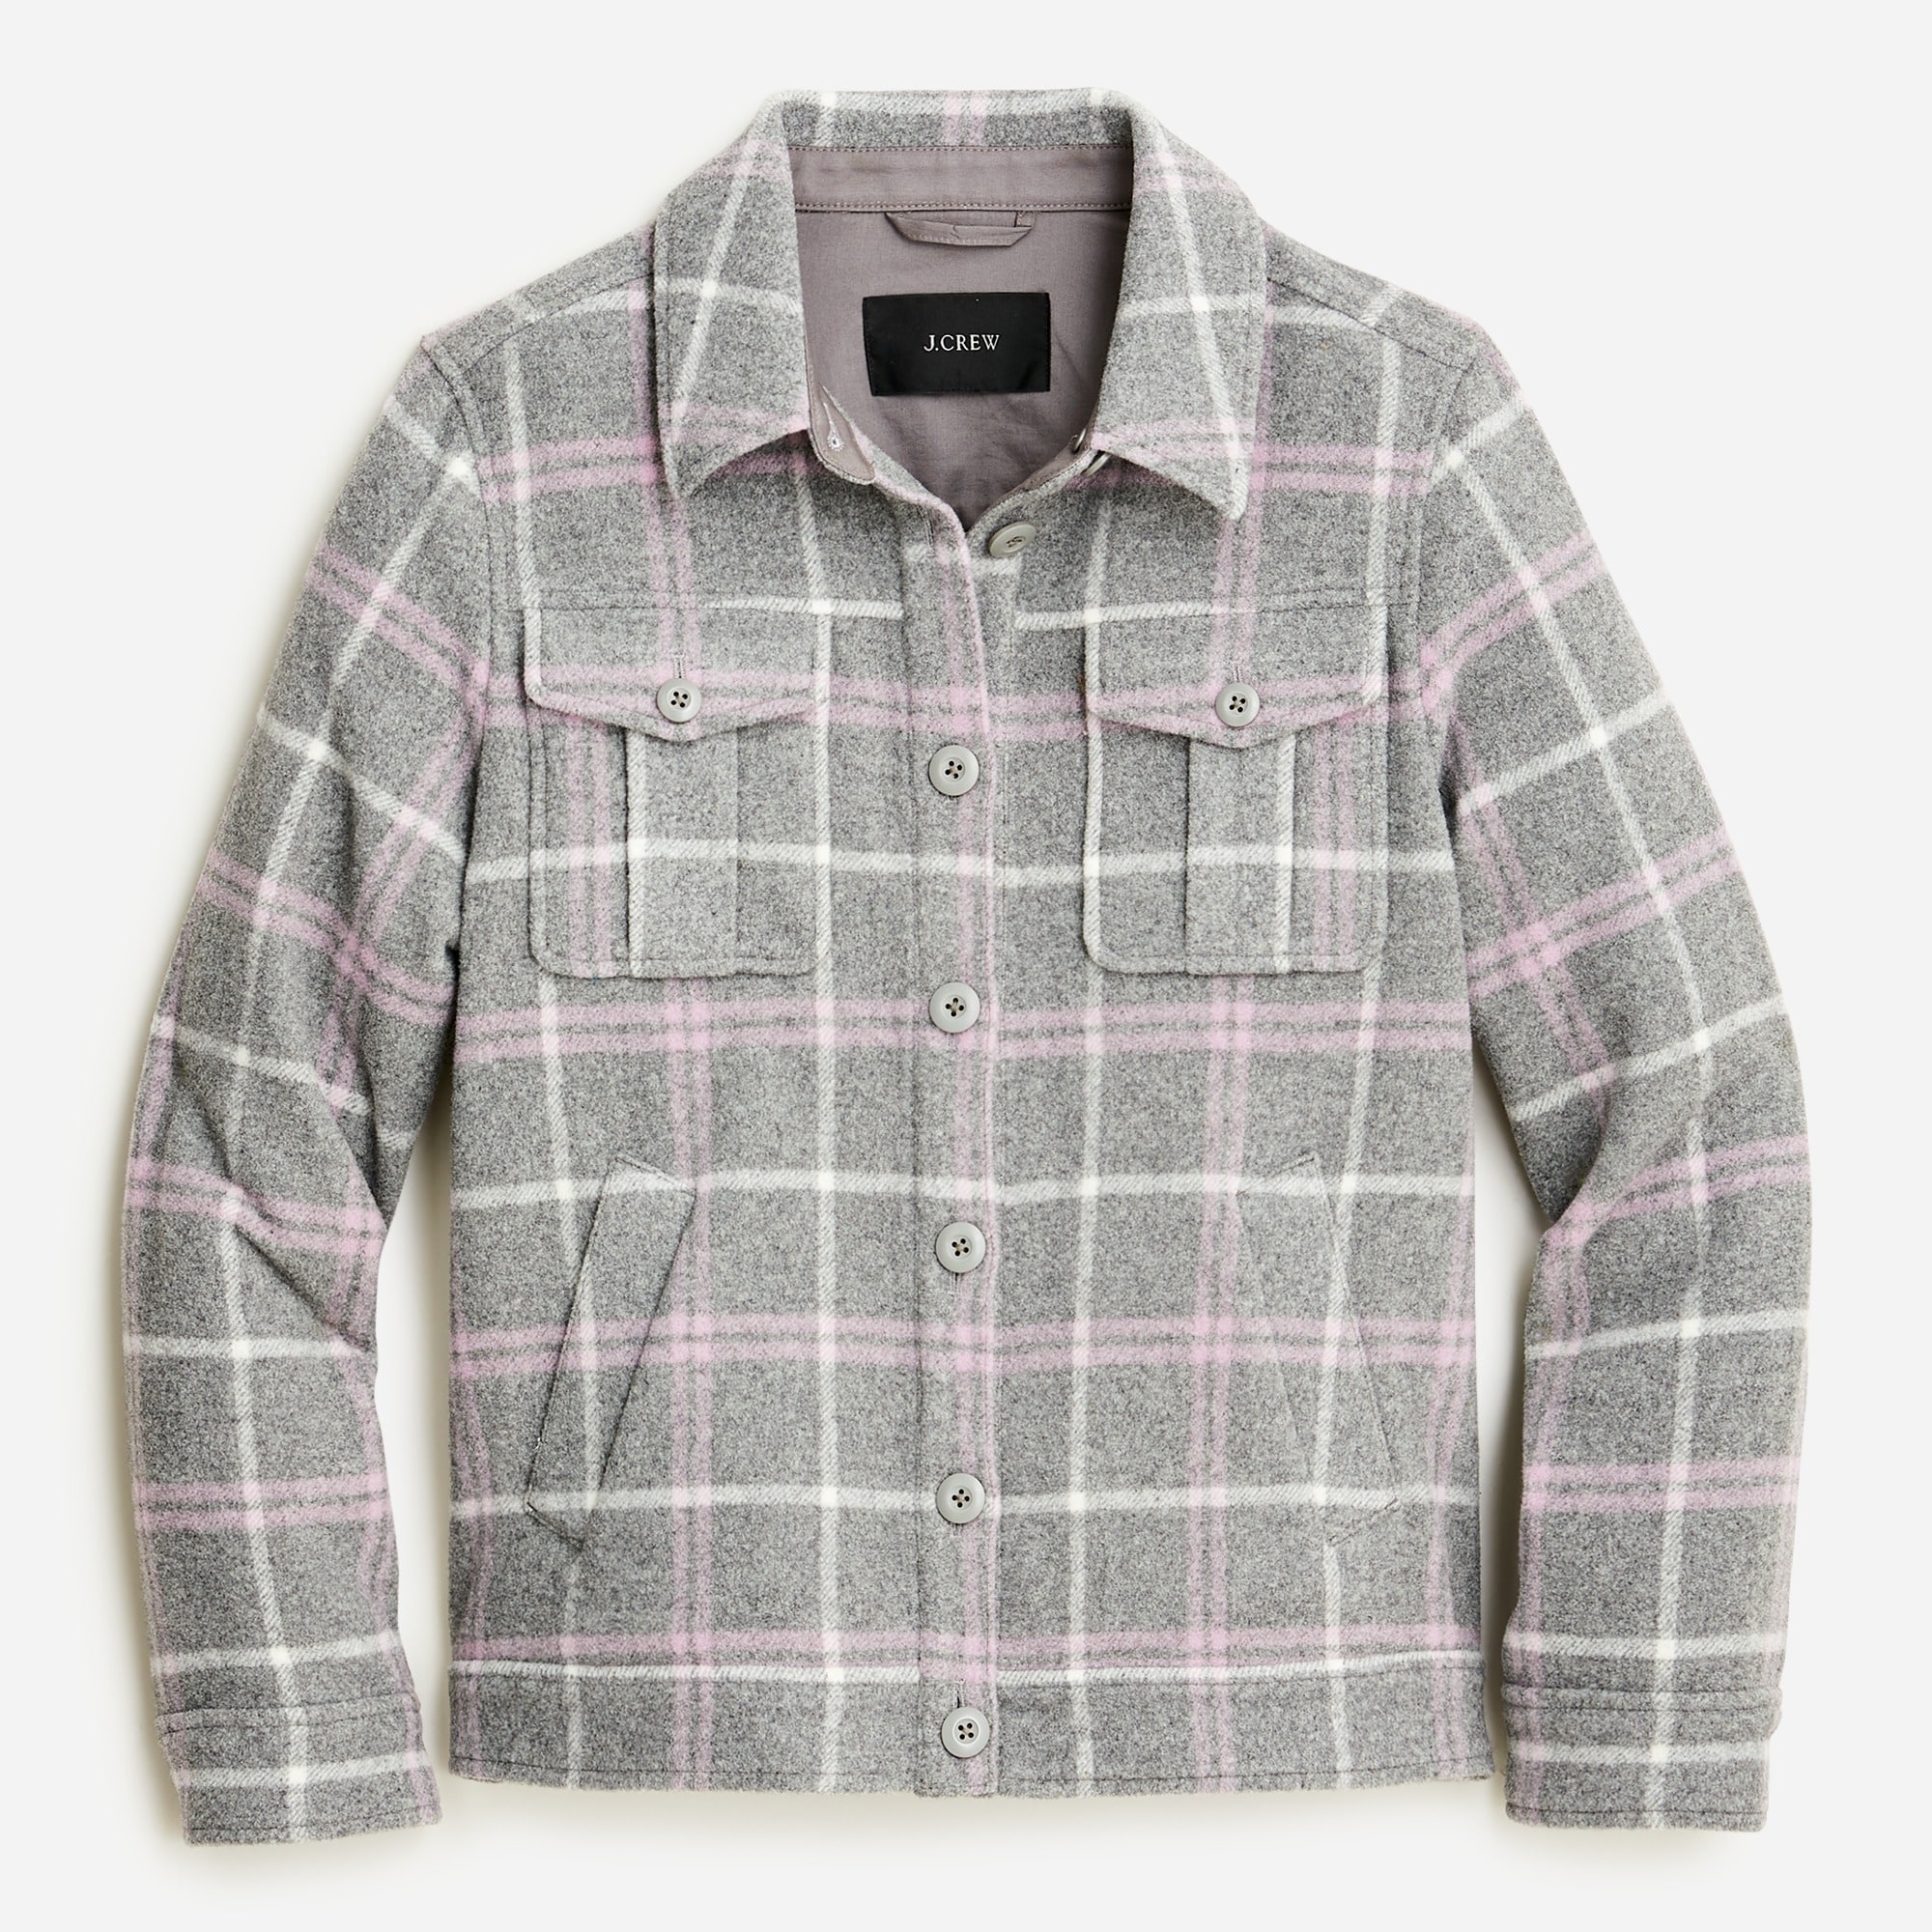 J.Crew: Shirt-jacket In Stretch Wool-blend Plaid For Women